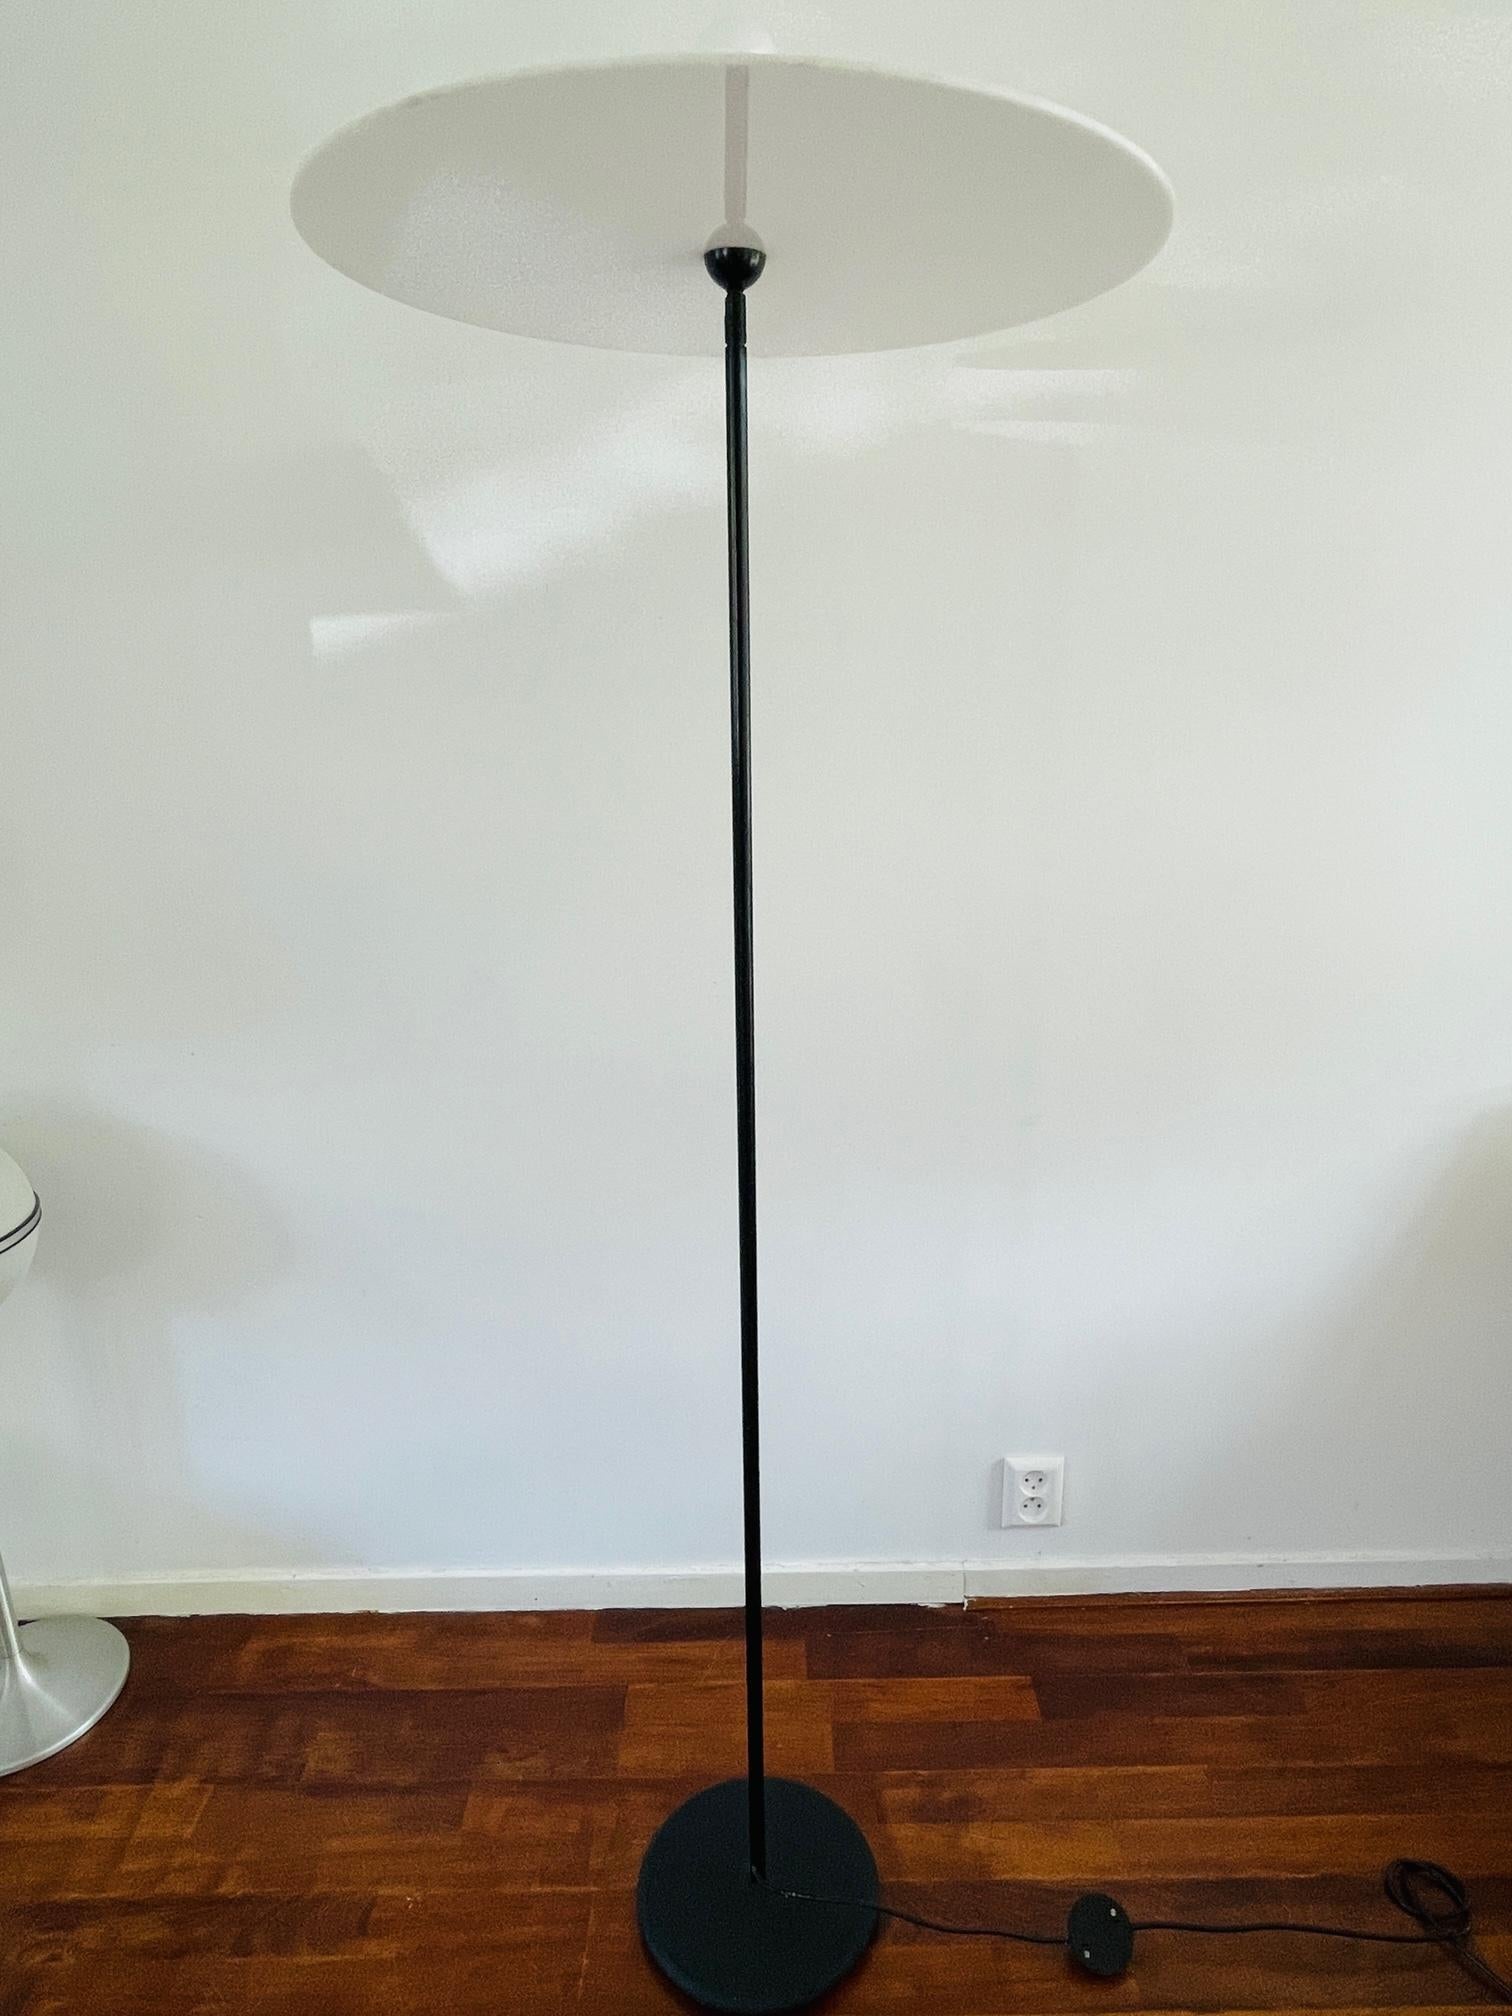 Rare floor lamp designed by Aldo van den Nieuwelaar for Nila & Nila lights in 1974. This floor lamp was called 'Disk'. Very nice large Lucite disc shade and black metal. Adjustable shade and very nice light effect. The lamp is in really good but